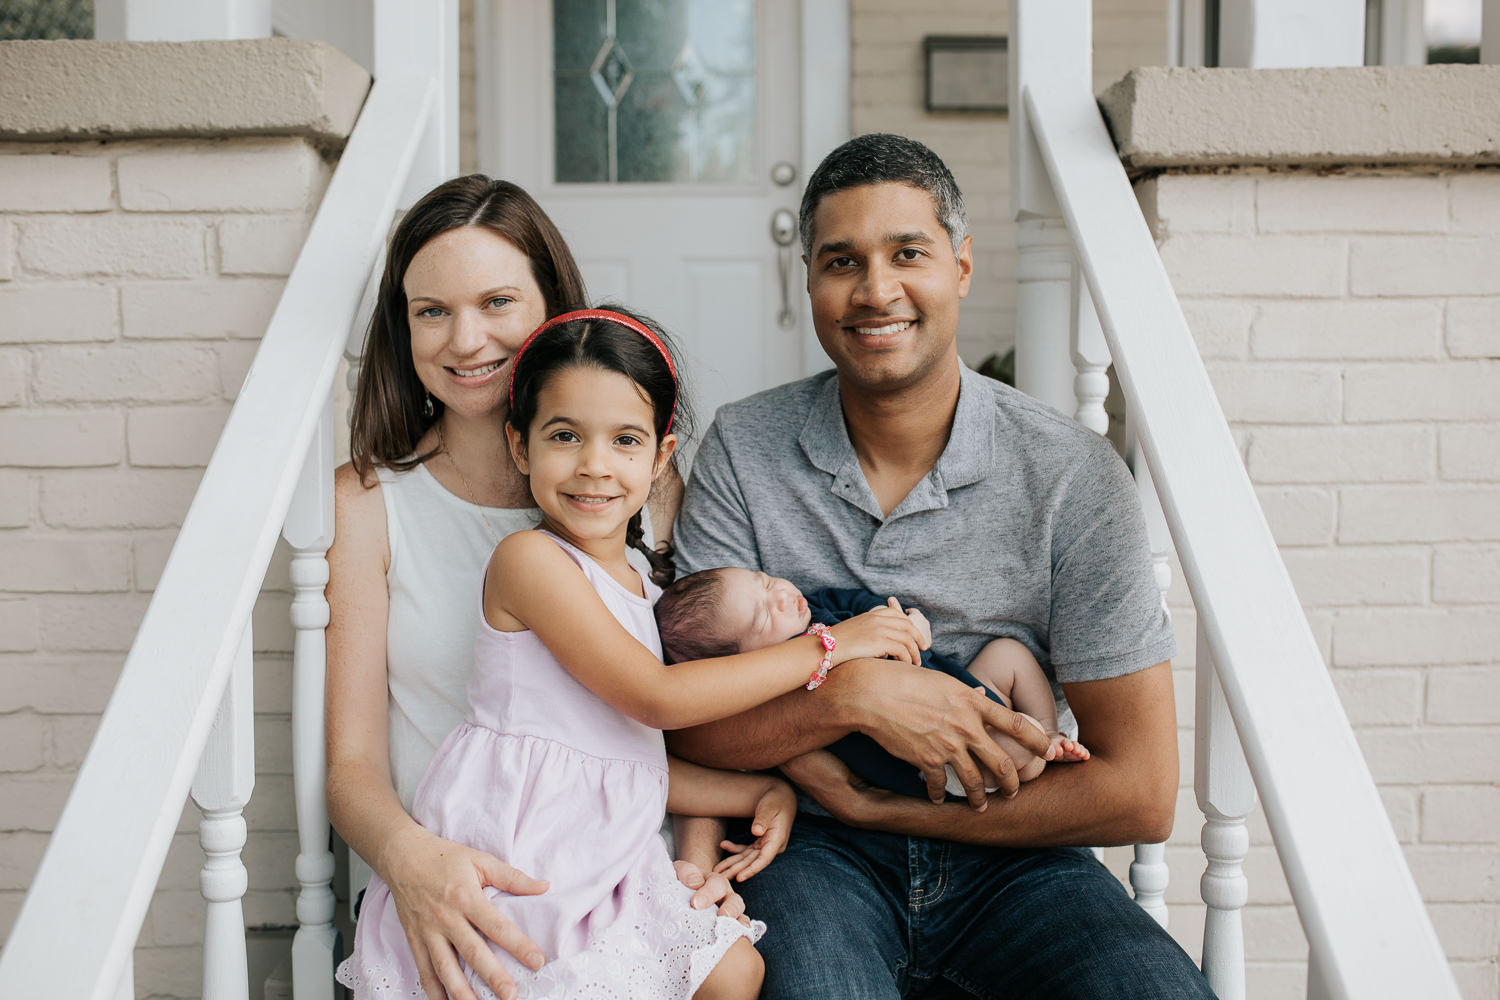 family of 4 sitting on front porch looking at camera, dad holding 2 week old baby boy in his arms and 4 year old toddler girl sitting in mom's lap - York Region Lifestyle Photos